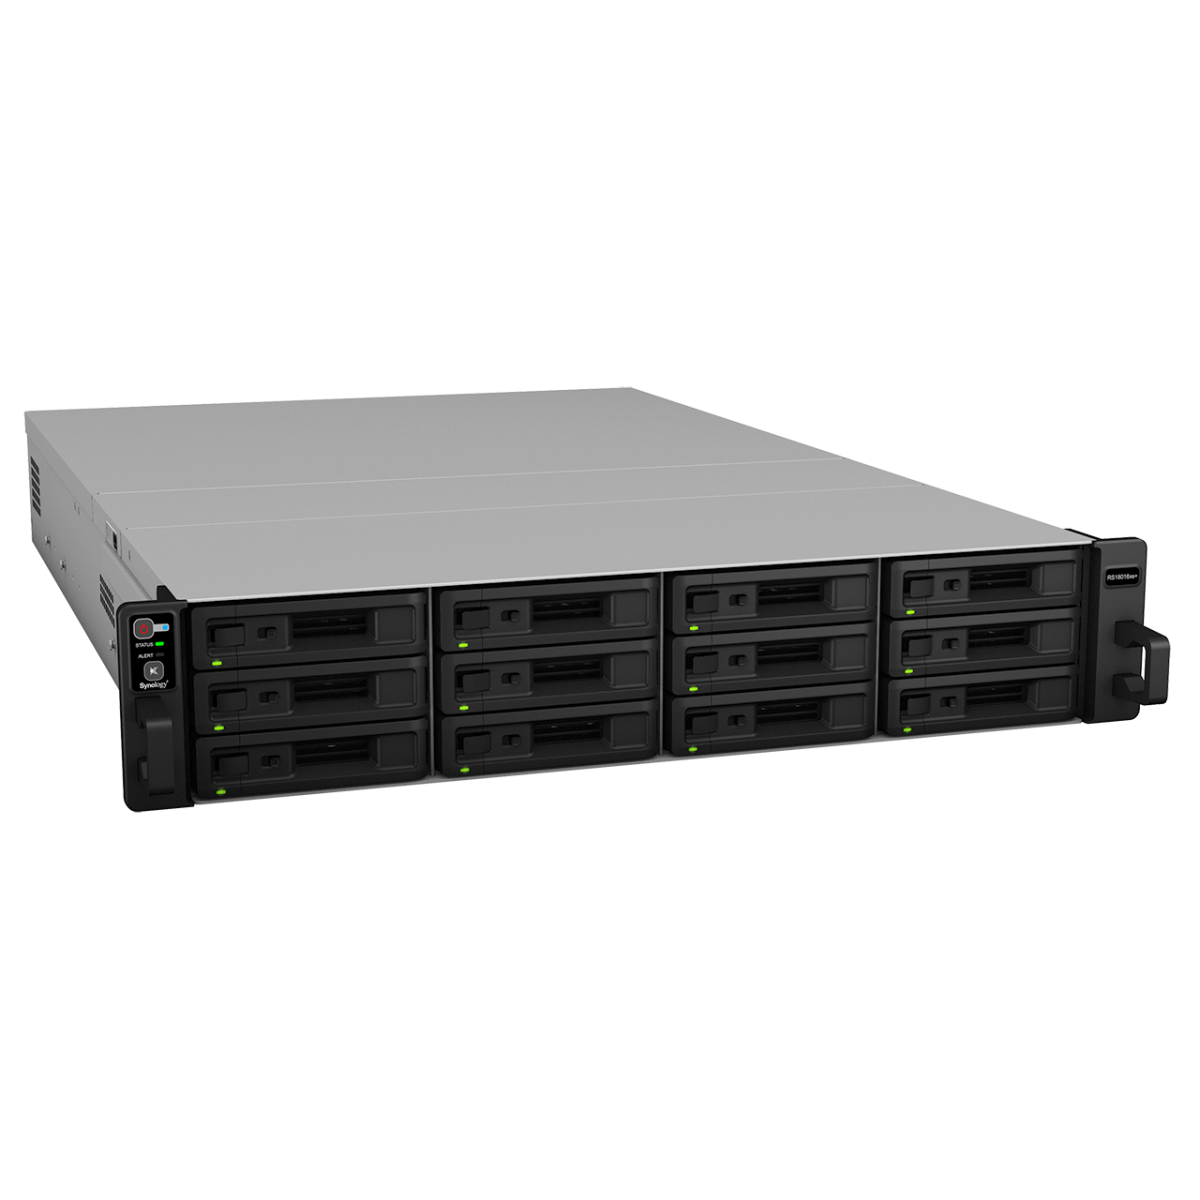 Synology Announces RS18016xs+ and RX1216sas Business Data Storage Systems